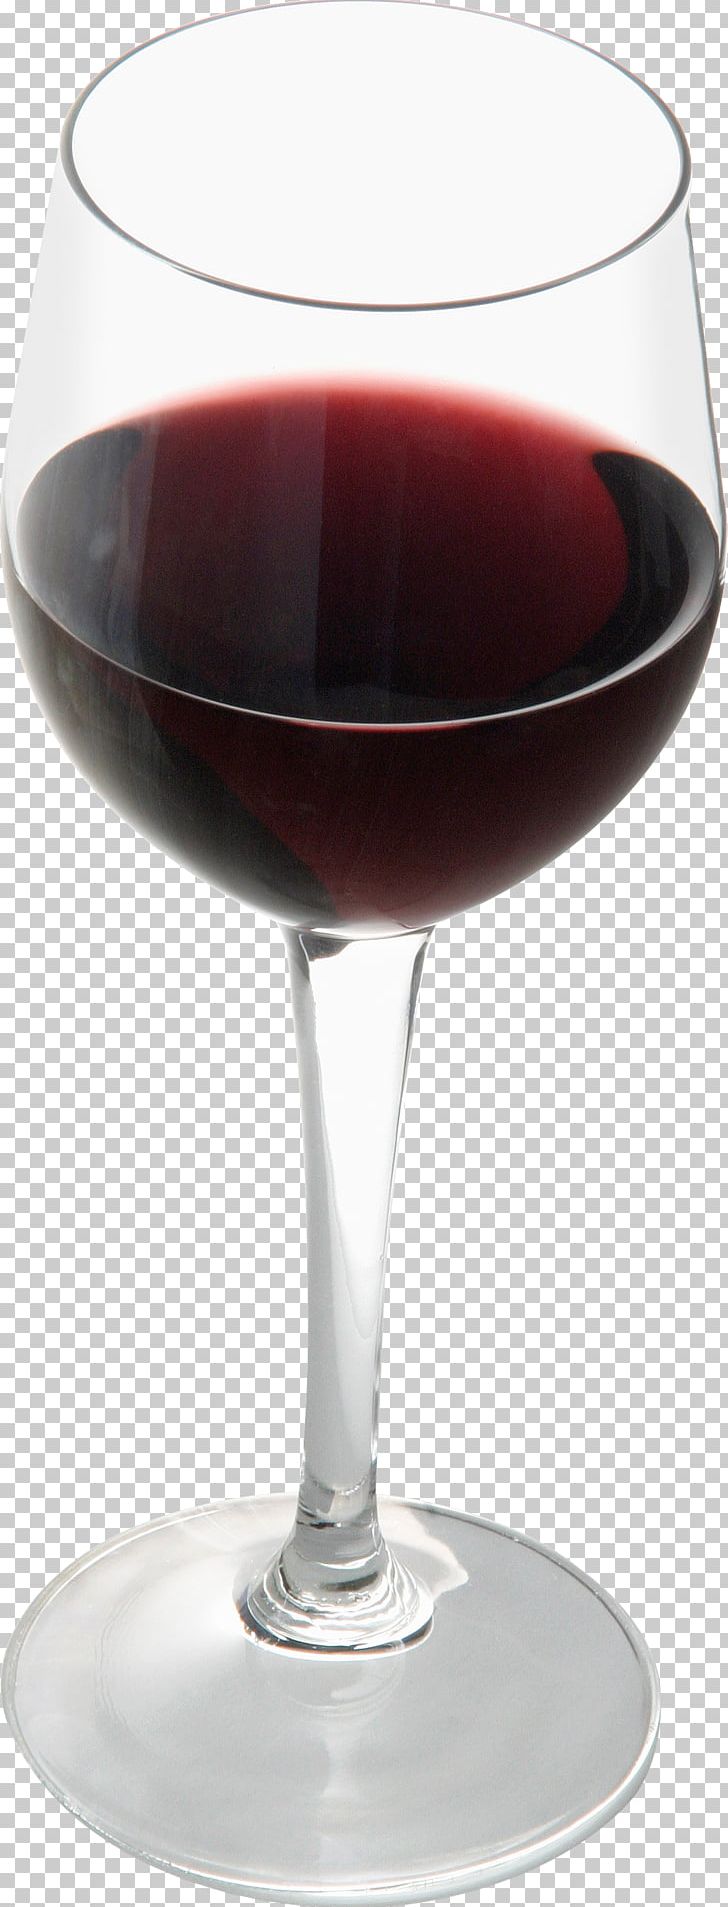 Red Wine The Glass Of Wine Champagne Cabernet Sauvignon PNG, Clipart, Cabernet Sauvignon, Champagne, Champagne Glass, Champagne Stemware, Drink Free PNG Download